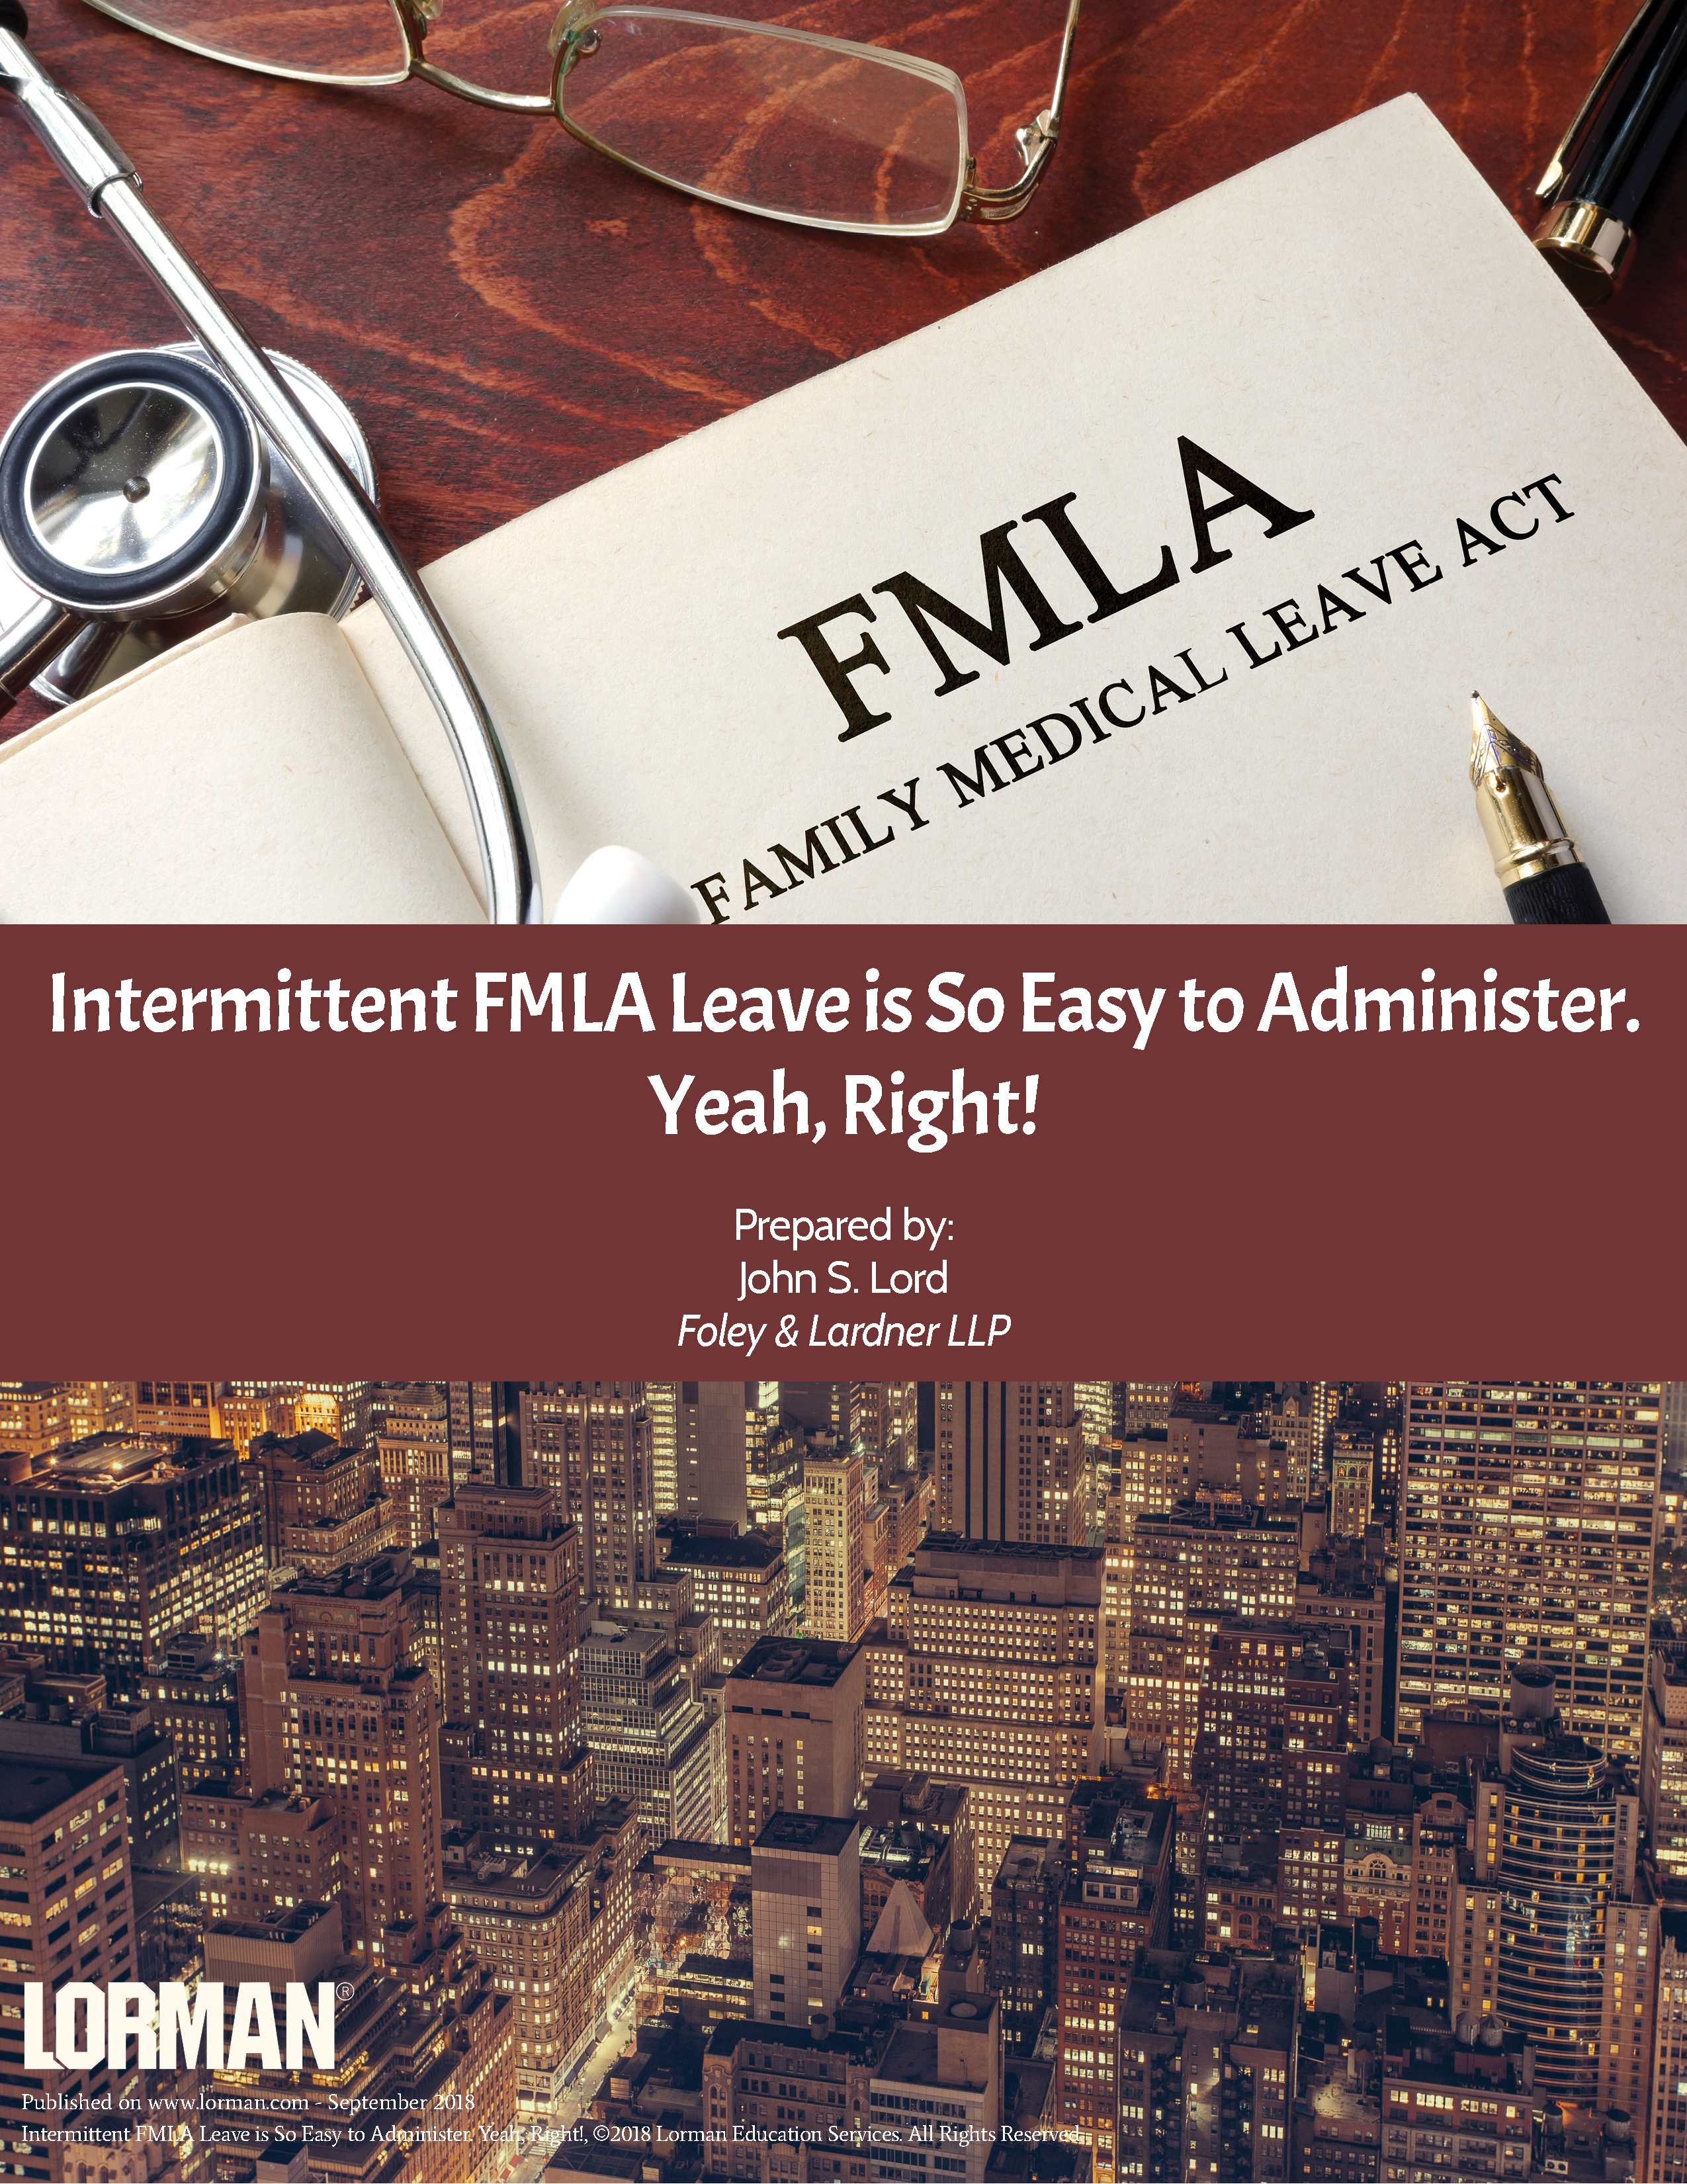 Intermittent FMLA Leave is So Easy to Administer. Yeah, Right.